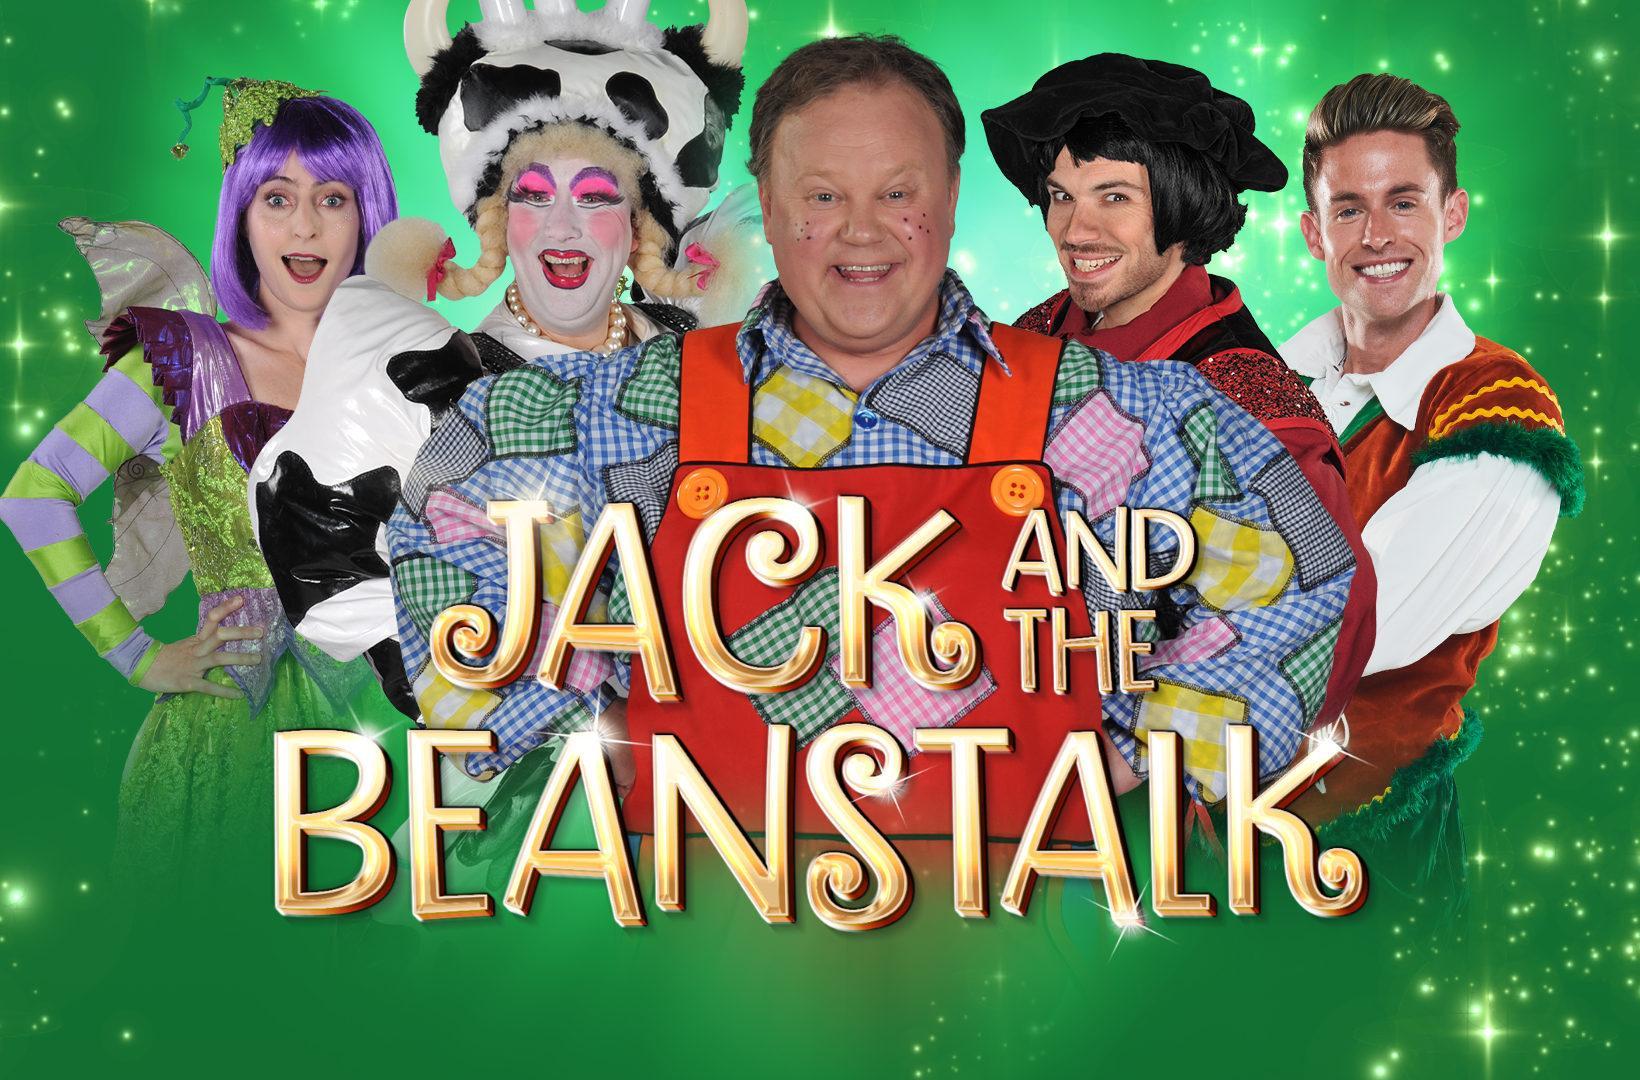 Jack And the Beanstalk